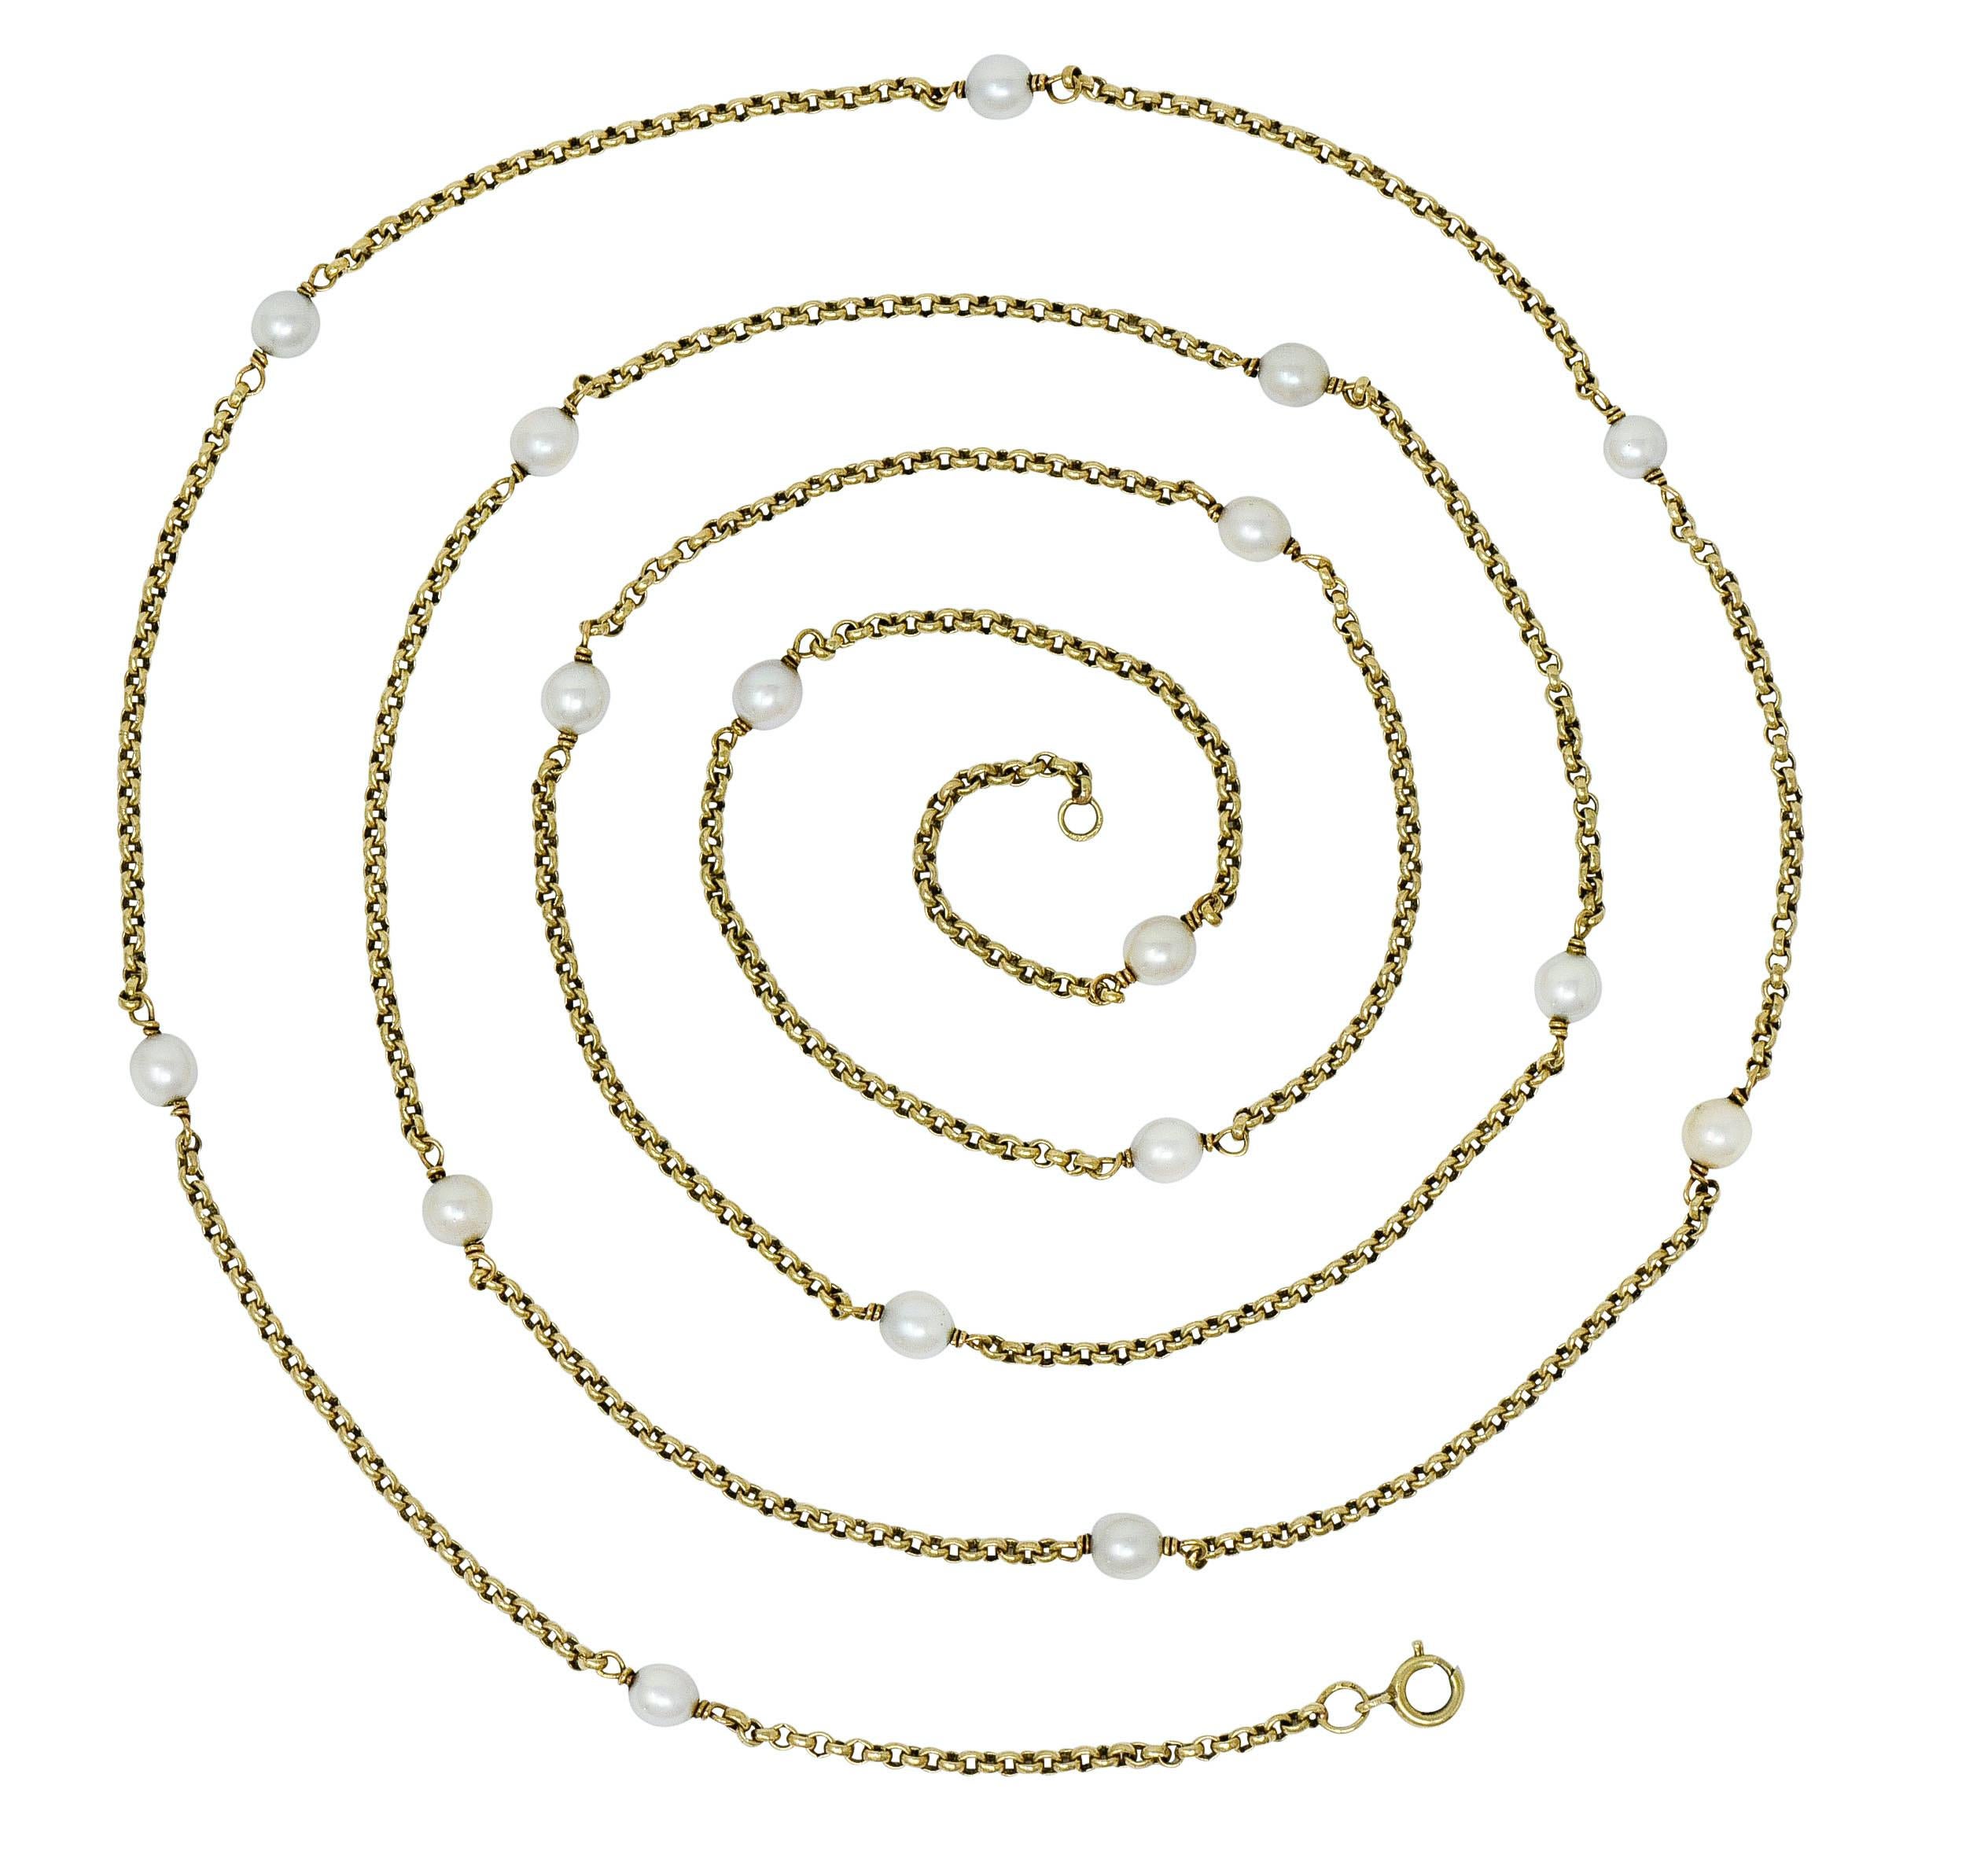 Long rolo chain necklace with pigtailed pearl stations throughout, measuring 5.3 mm to 5.8 mm

Gray and cream in body color with strong spectral overtones and most feature an excellent luster

Completed by a spring ring clasp

With French assay